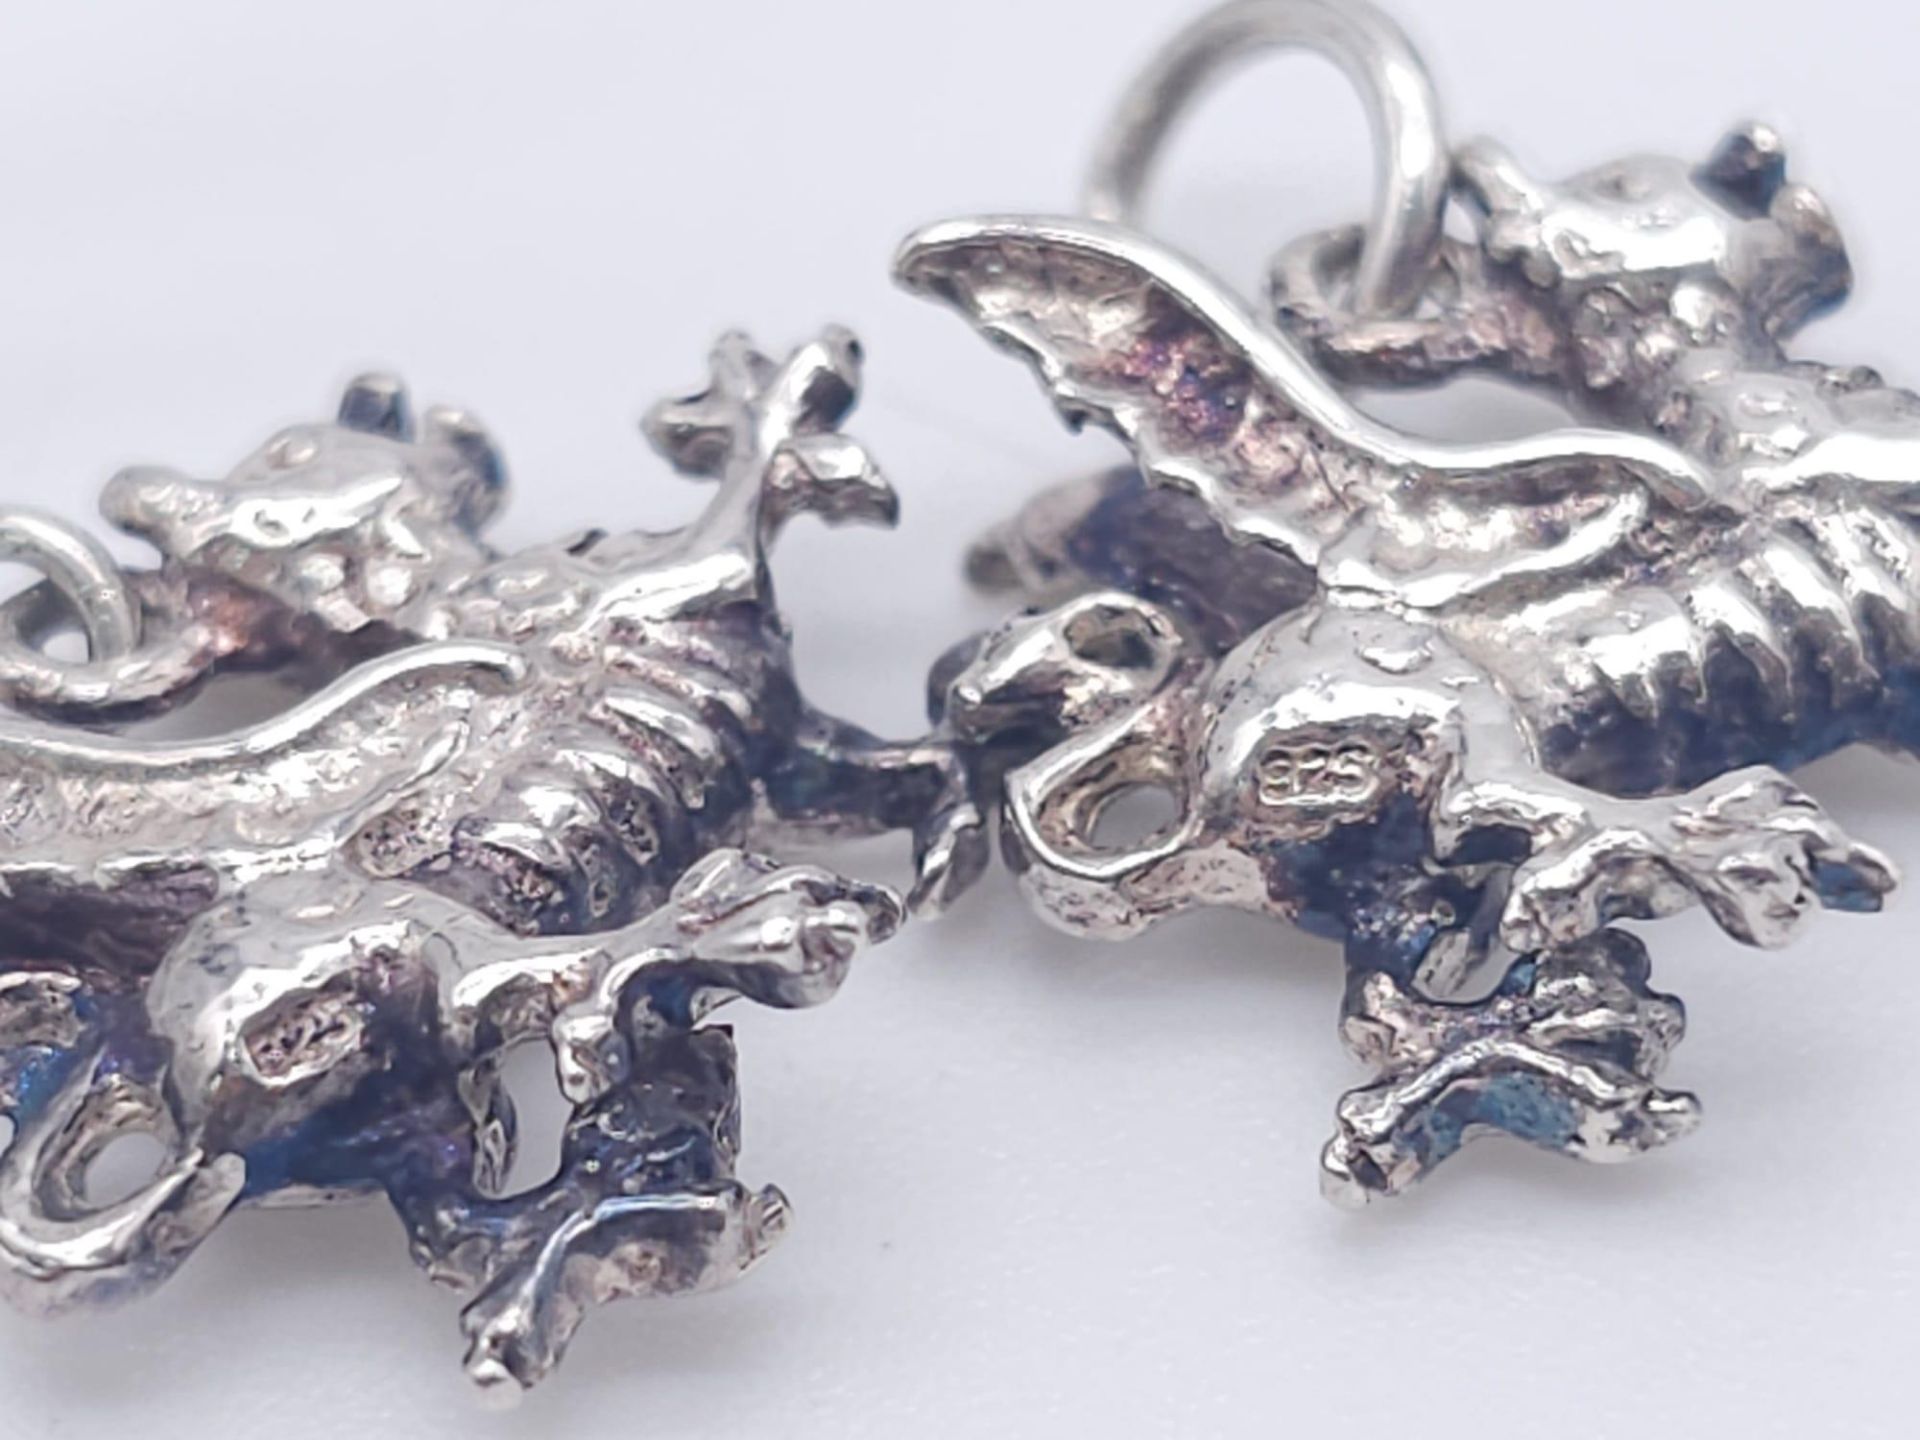 A STERLING SILVER WELSH DRAGON PAIR OF DROP EARRINGS AND MATCHING PENDANT / CHARM. 6.5G - Image 5 of 6